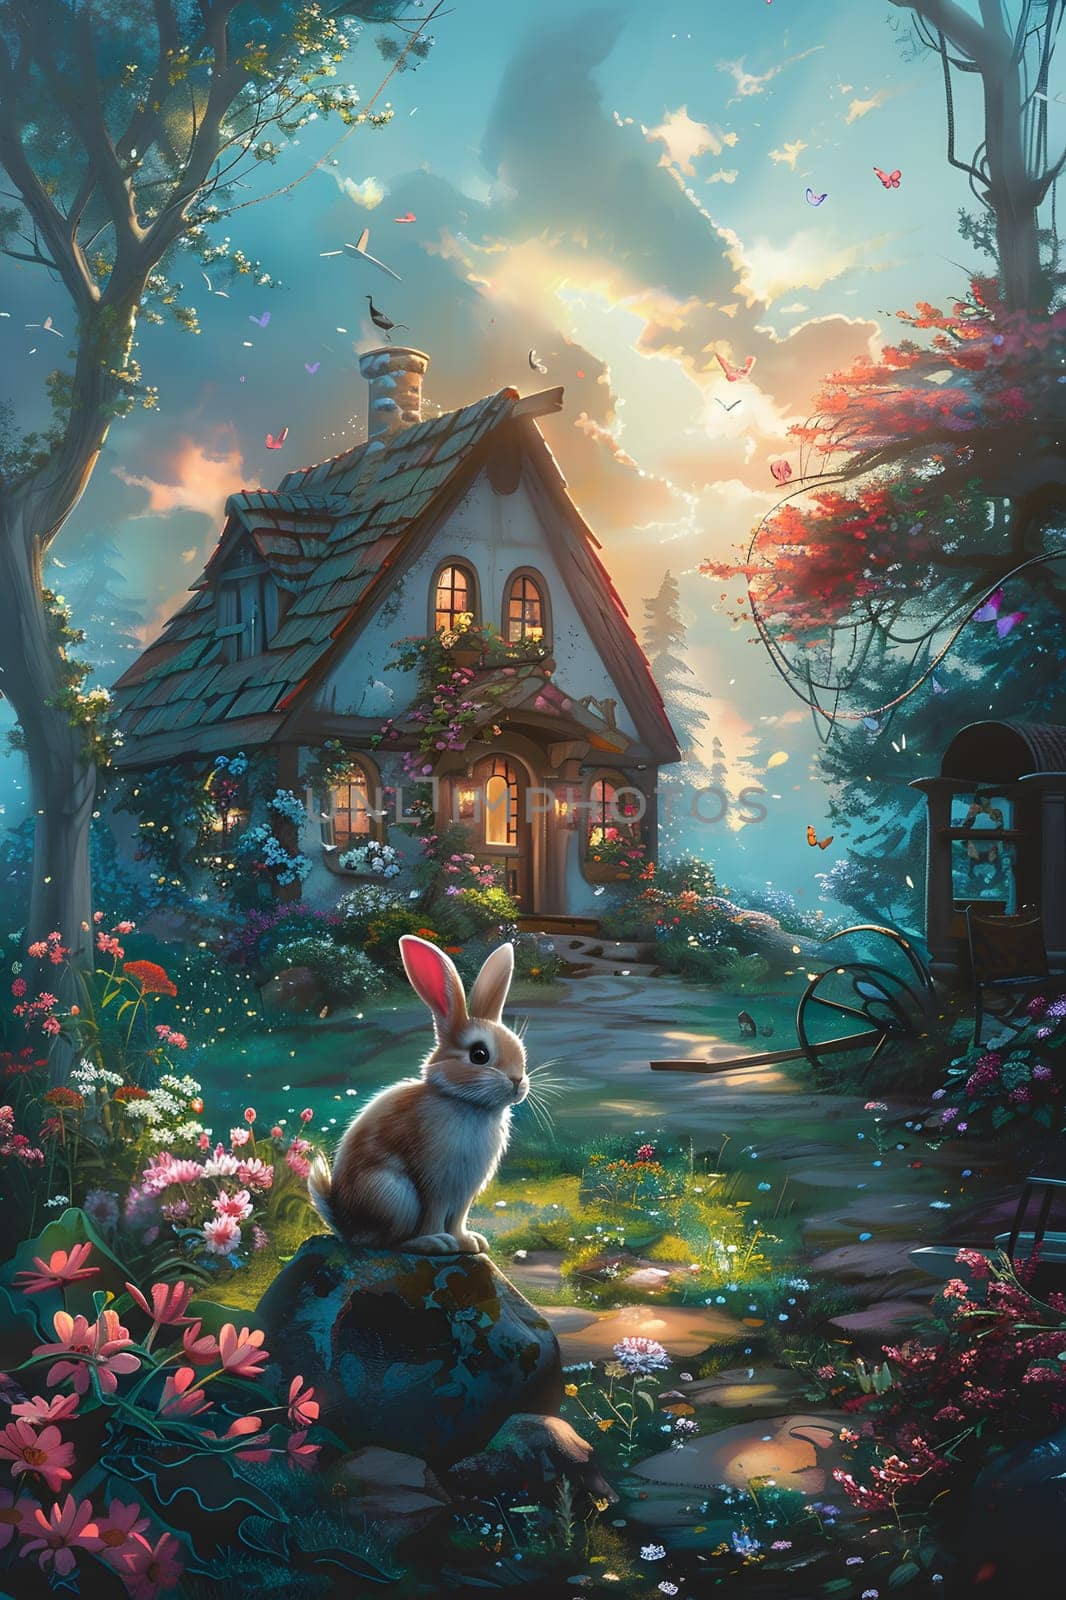 A cute rabbit is relaxing on a rock with a beautiful view of the house, trees, sky, clouds, plants, and birds in the painting. The art captures a serene moment in nature